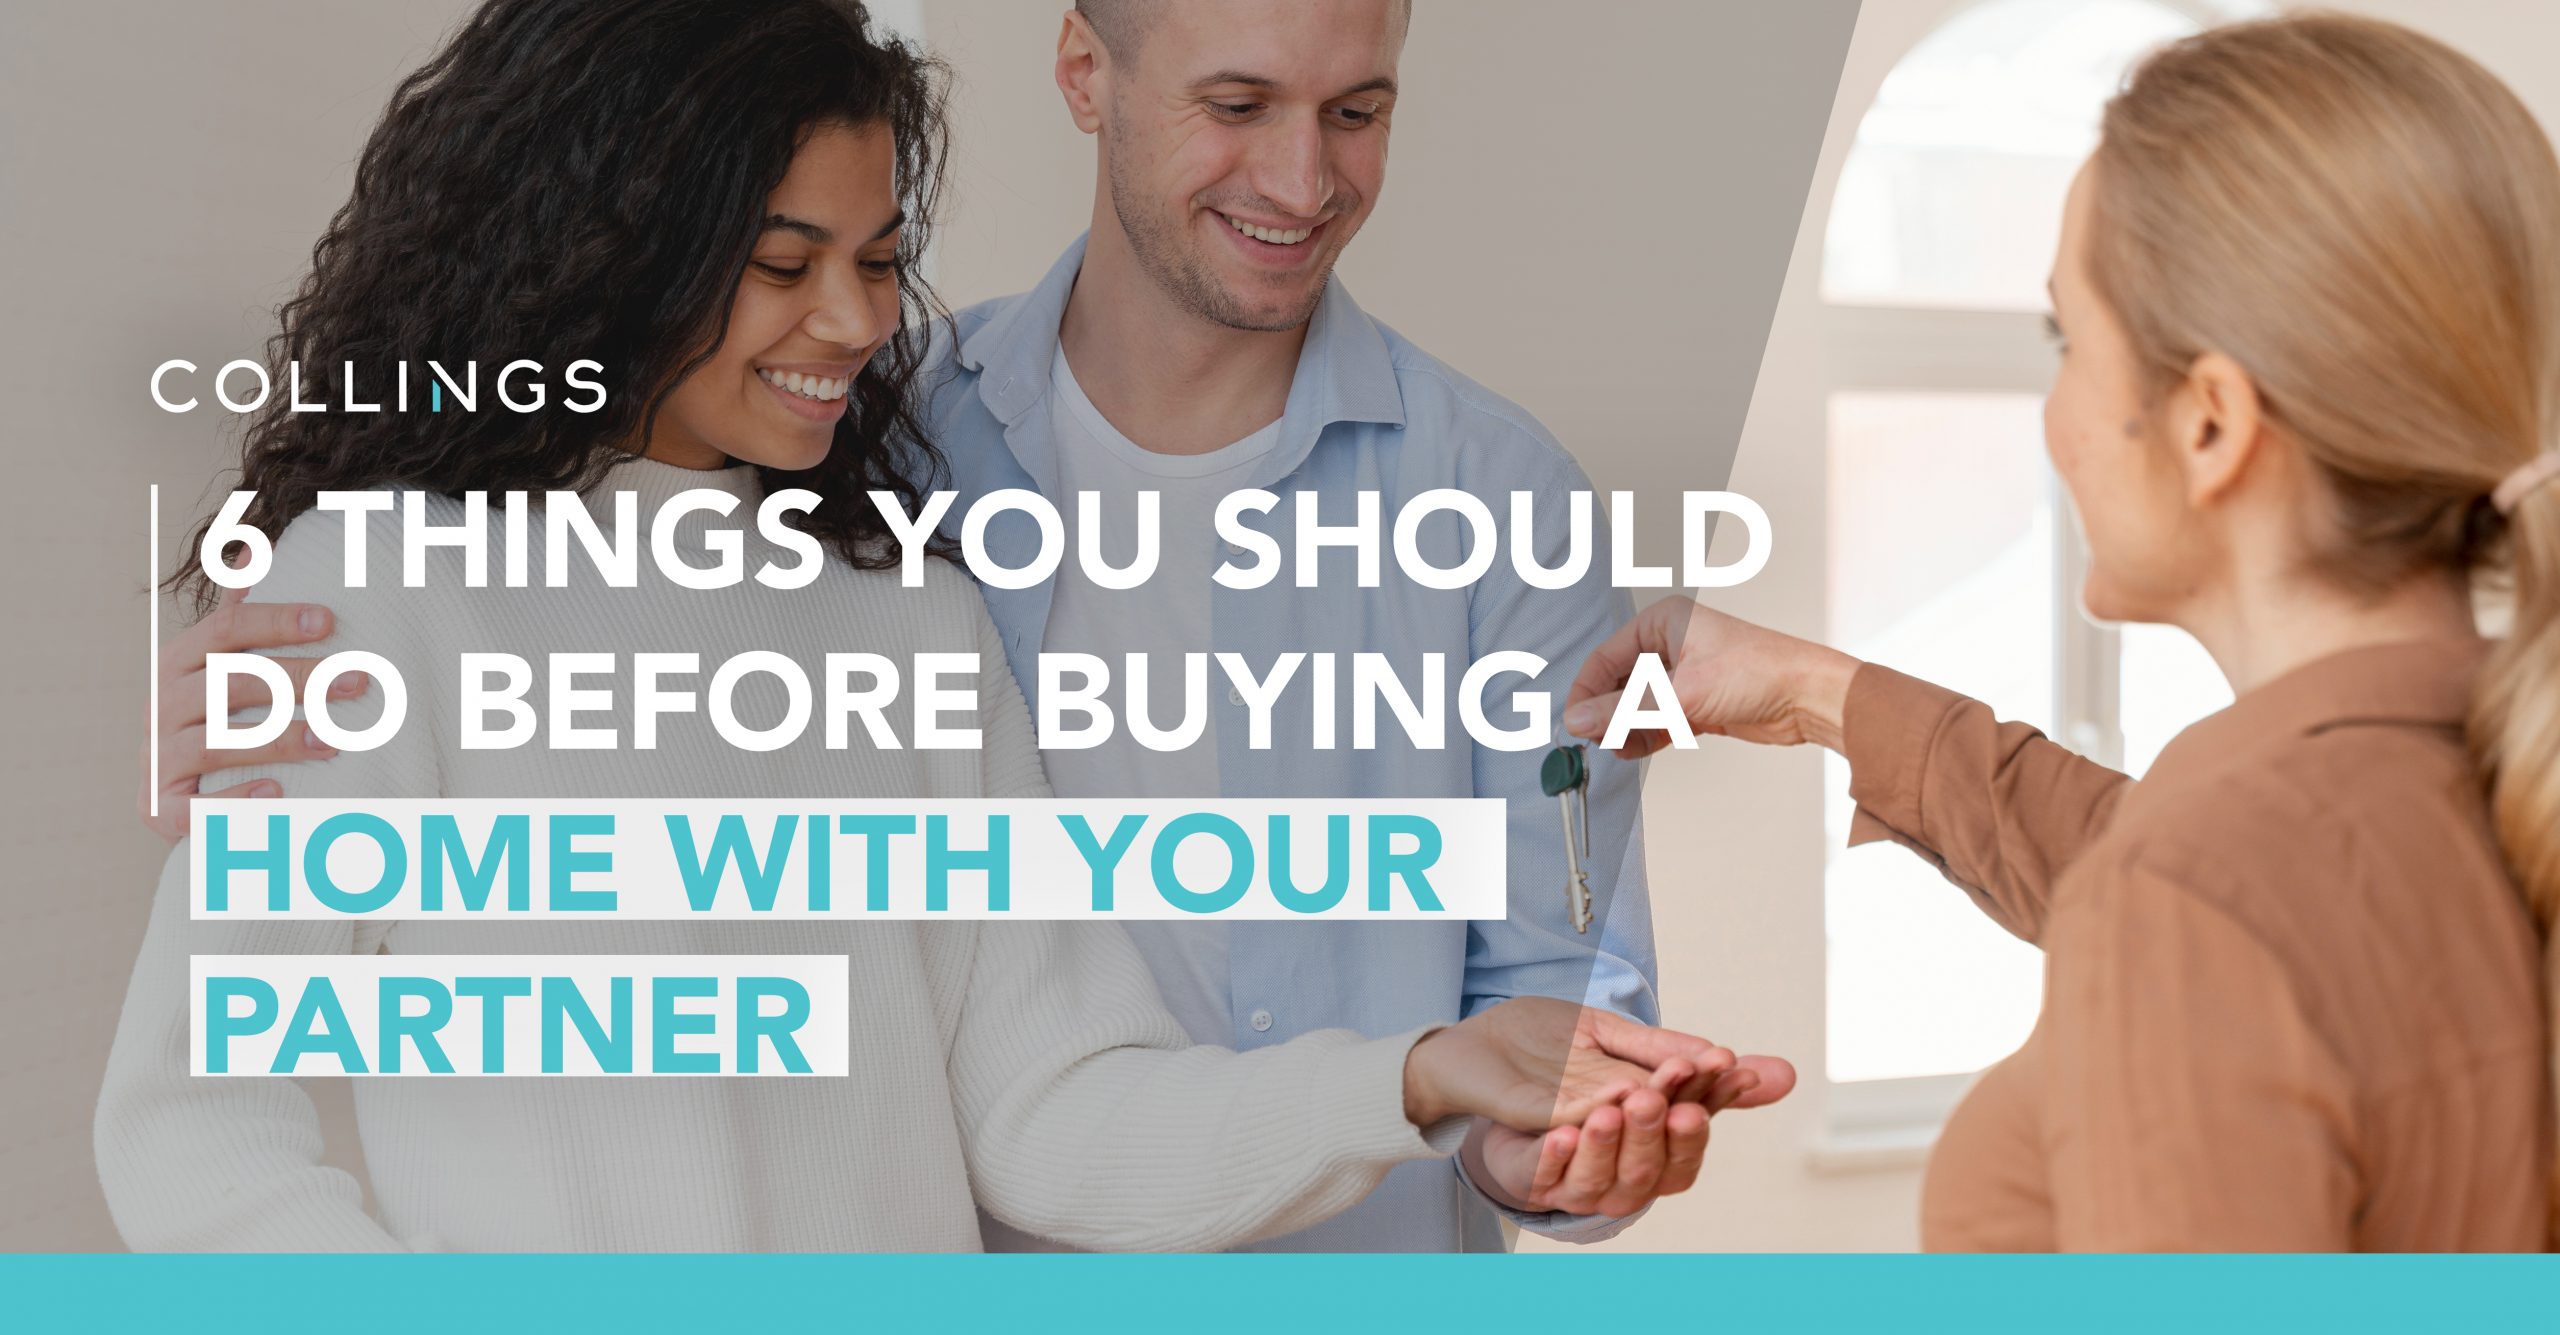 6 Things You Should Do Before Buying a Home With Your Partner